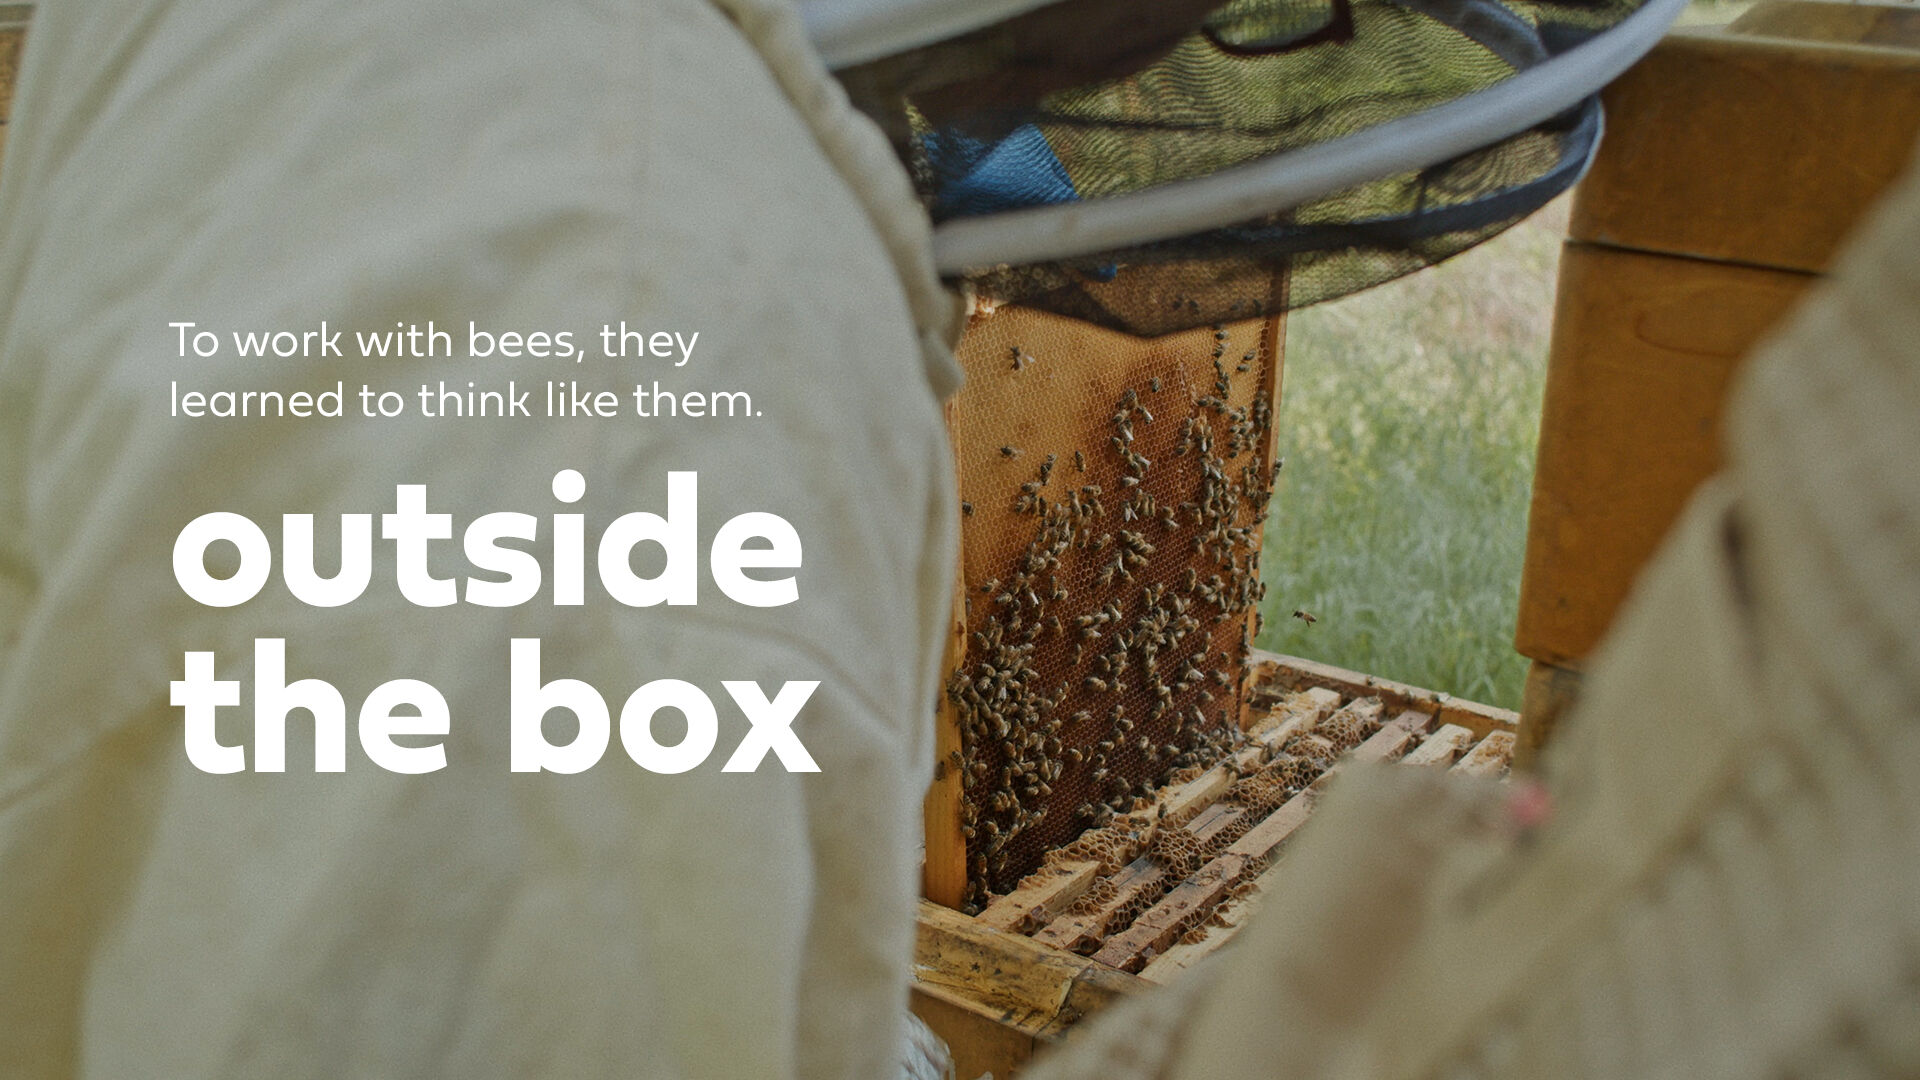 Outside the box  - To work with bees, they learned to think like them